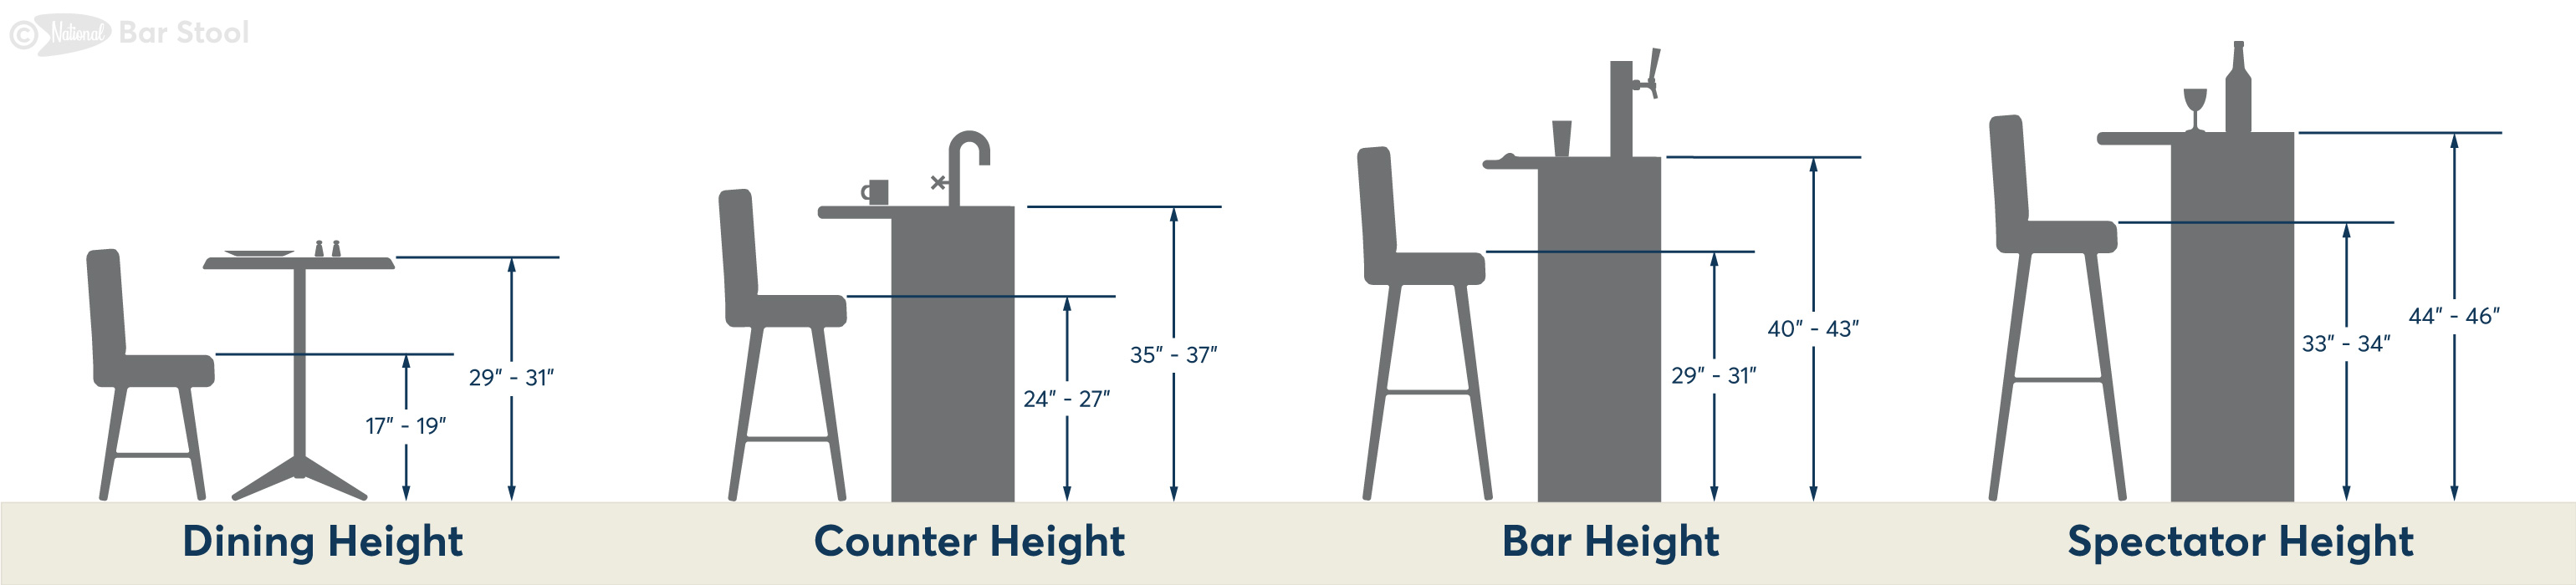 Bar Stool Ing Guide National, How To Pick A Bar Stool Height